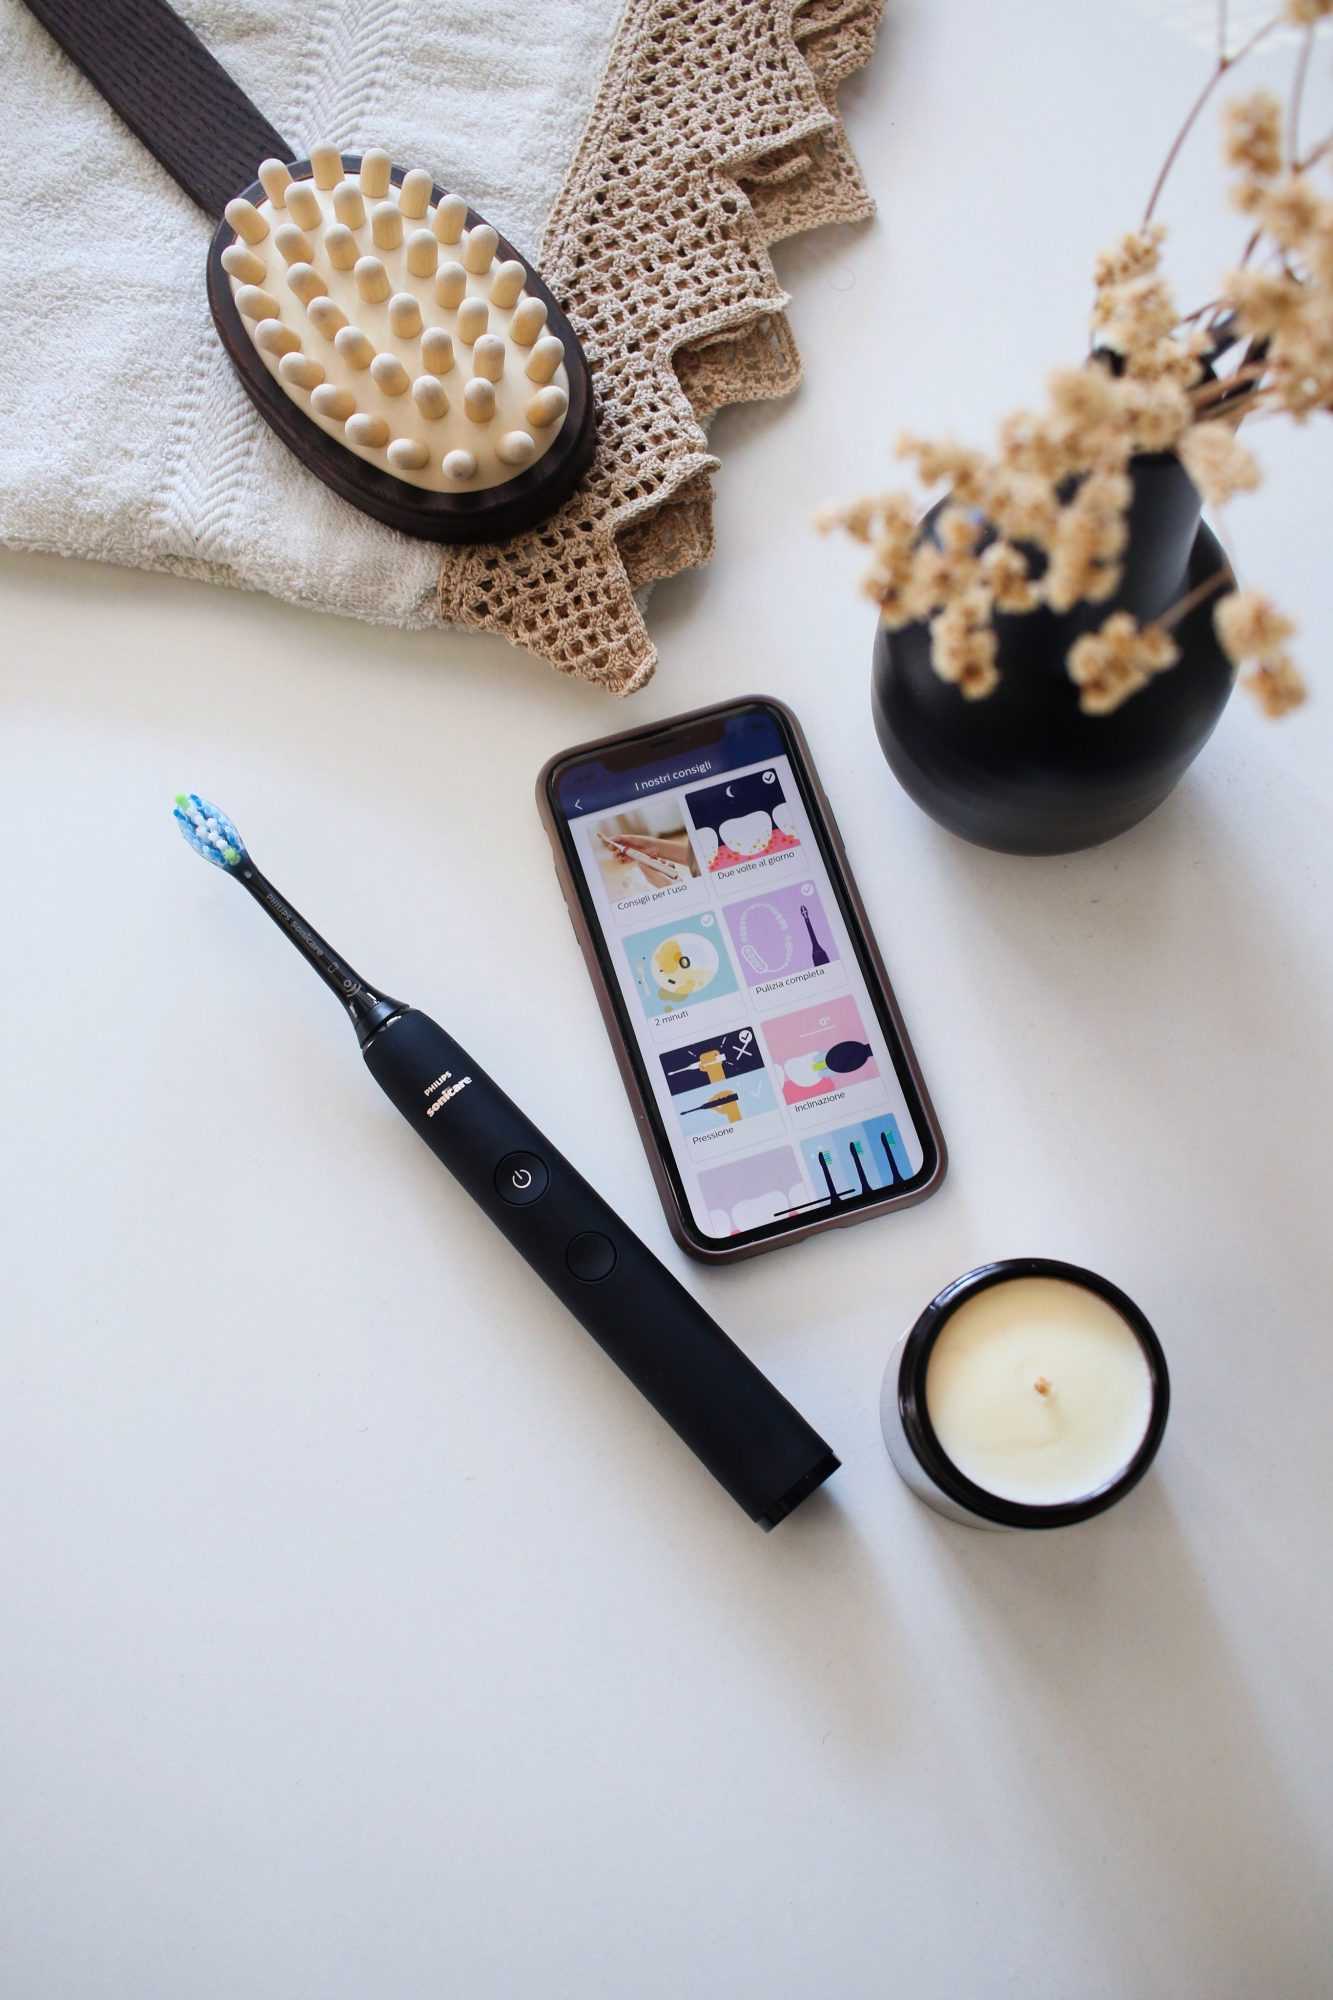 Philips Sonicare: the electric toothbrush to keep your smile all summer long